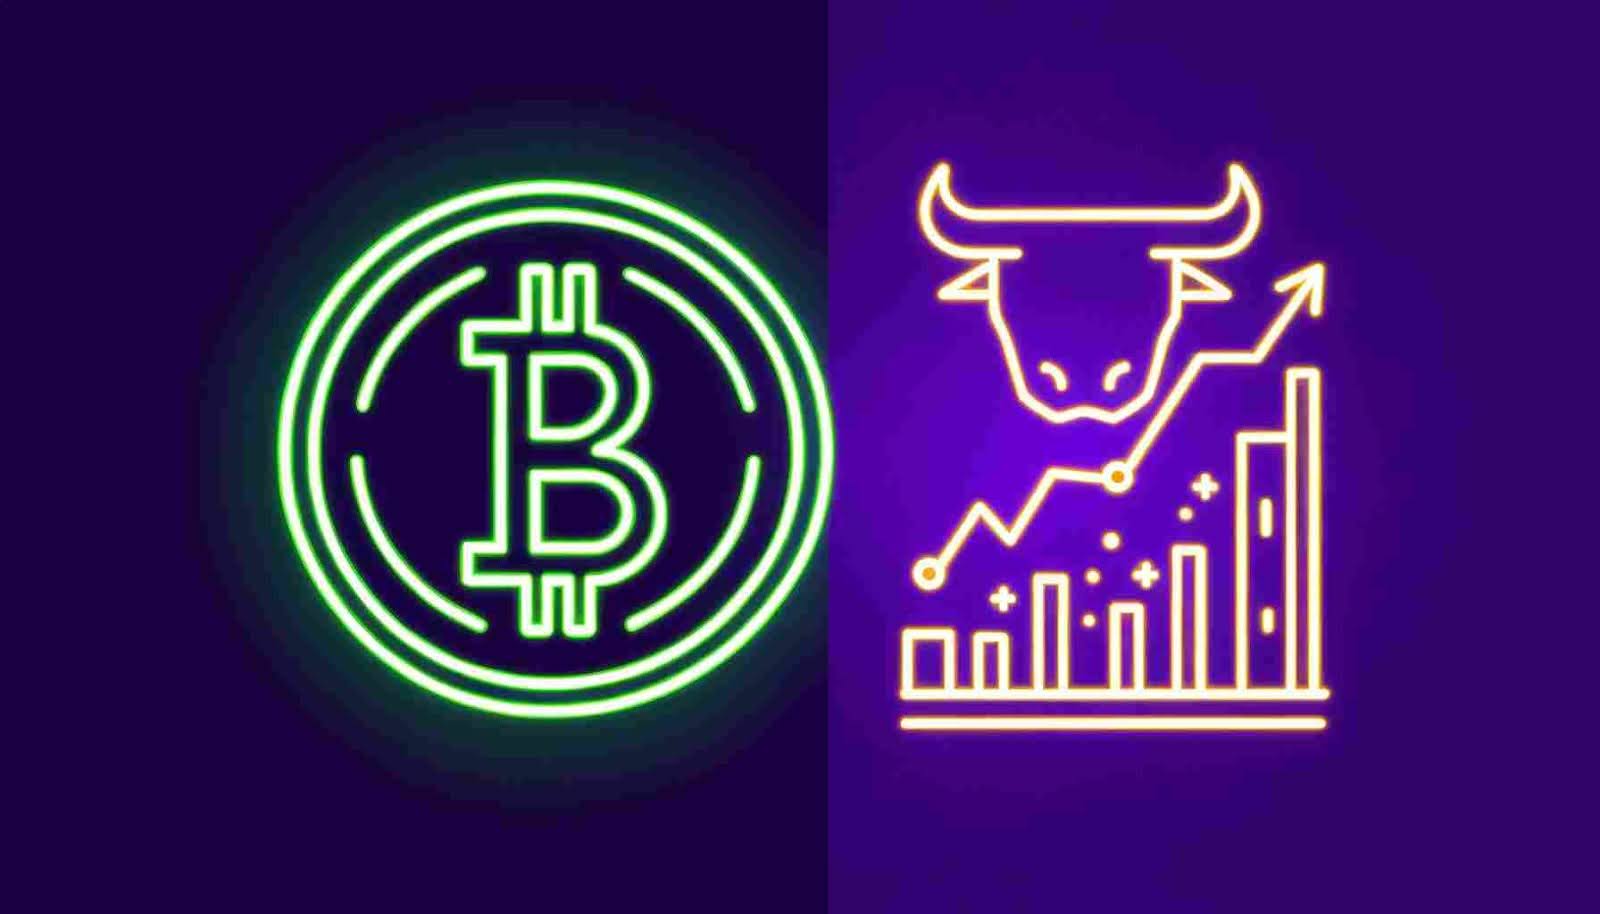 Cryptocurrency Vs Stock Market Investments - Which Are Better?